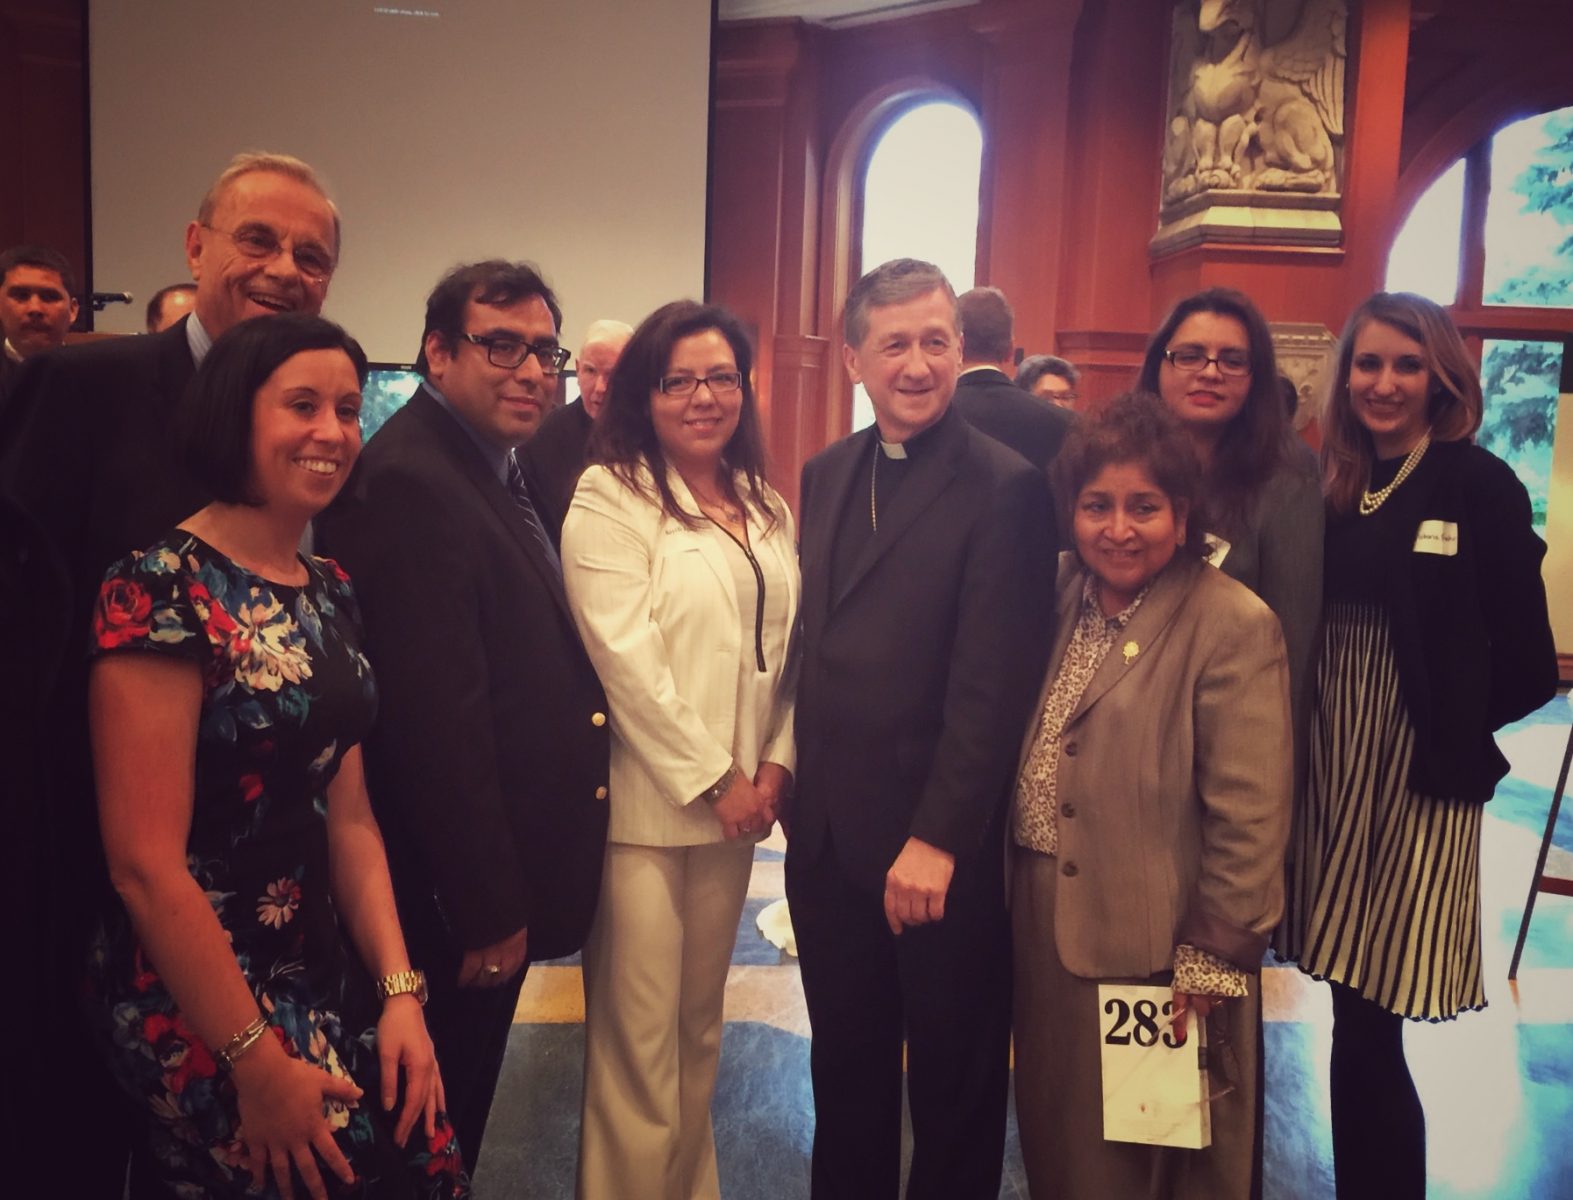 The Law Office of Robert D. Ahlgren is one of the Sponsors of the Voices from the Journey Fundraiser Hosted by Archbishop Cupich to Benefit the Office of Immigrant Affairs